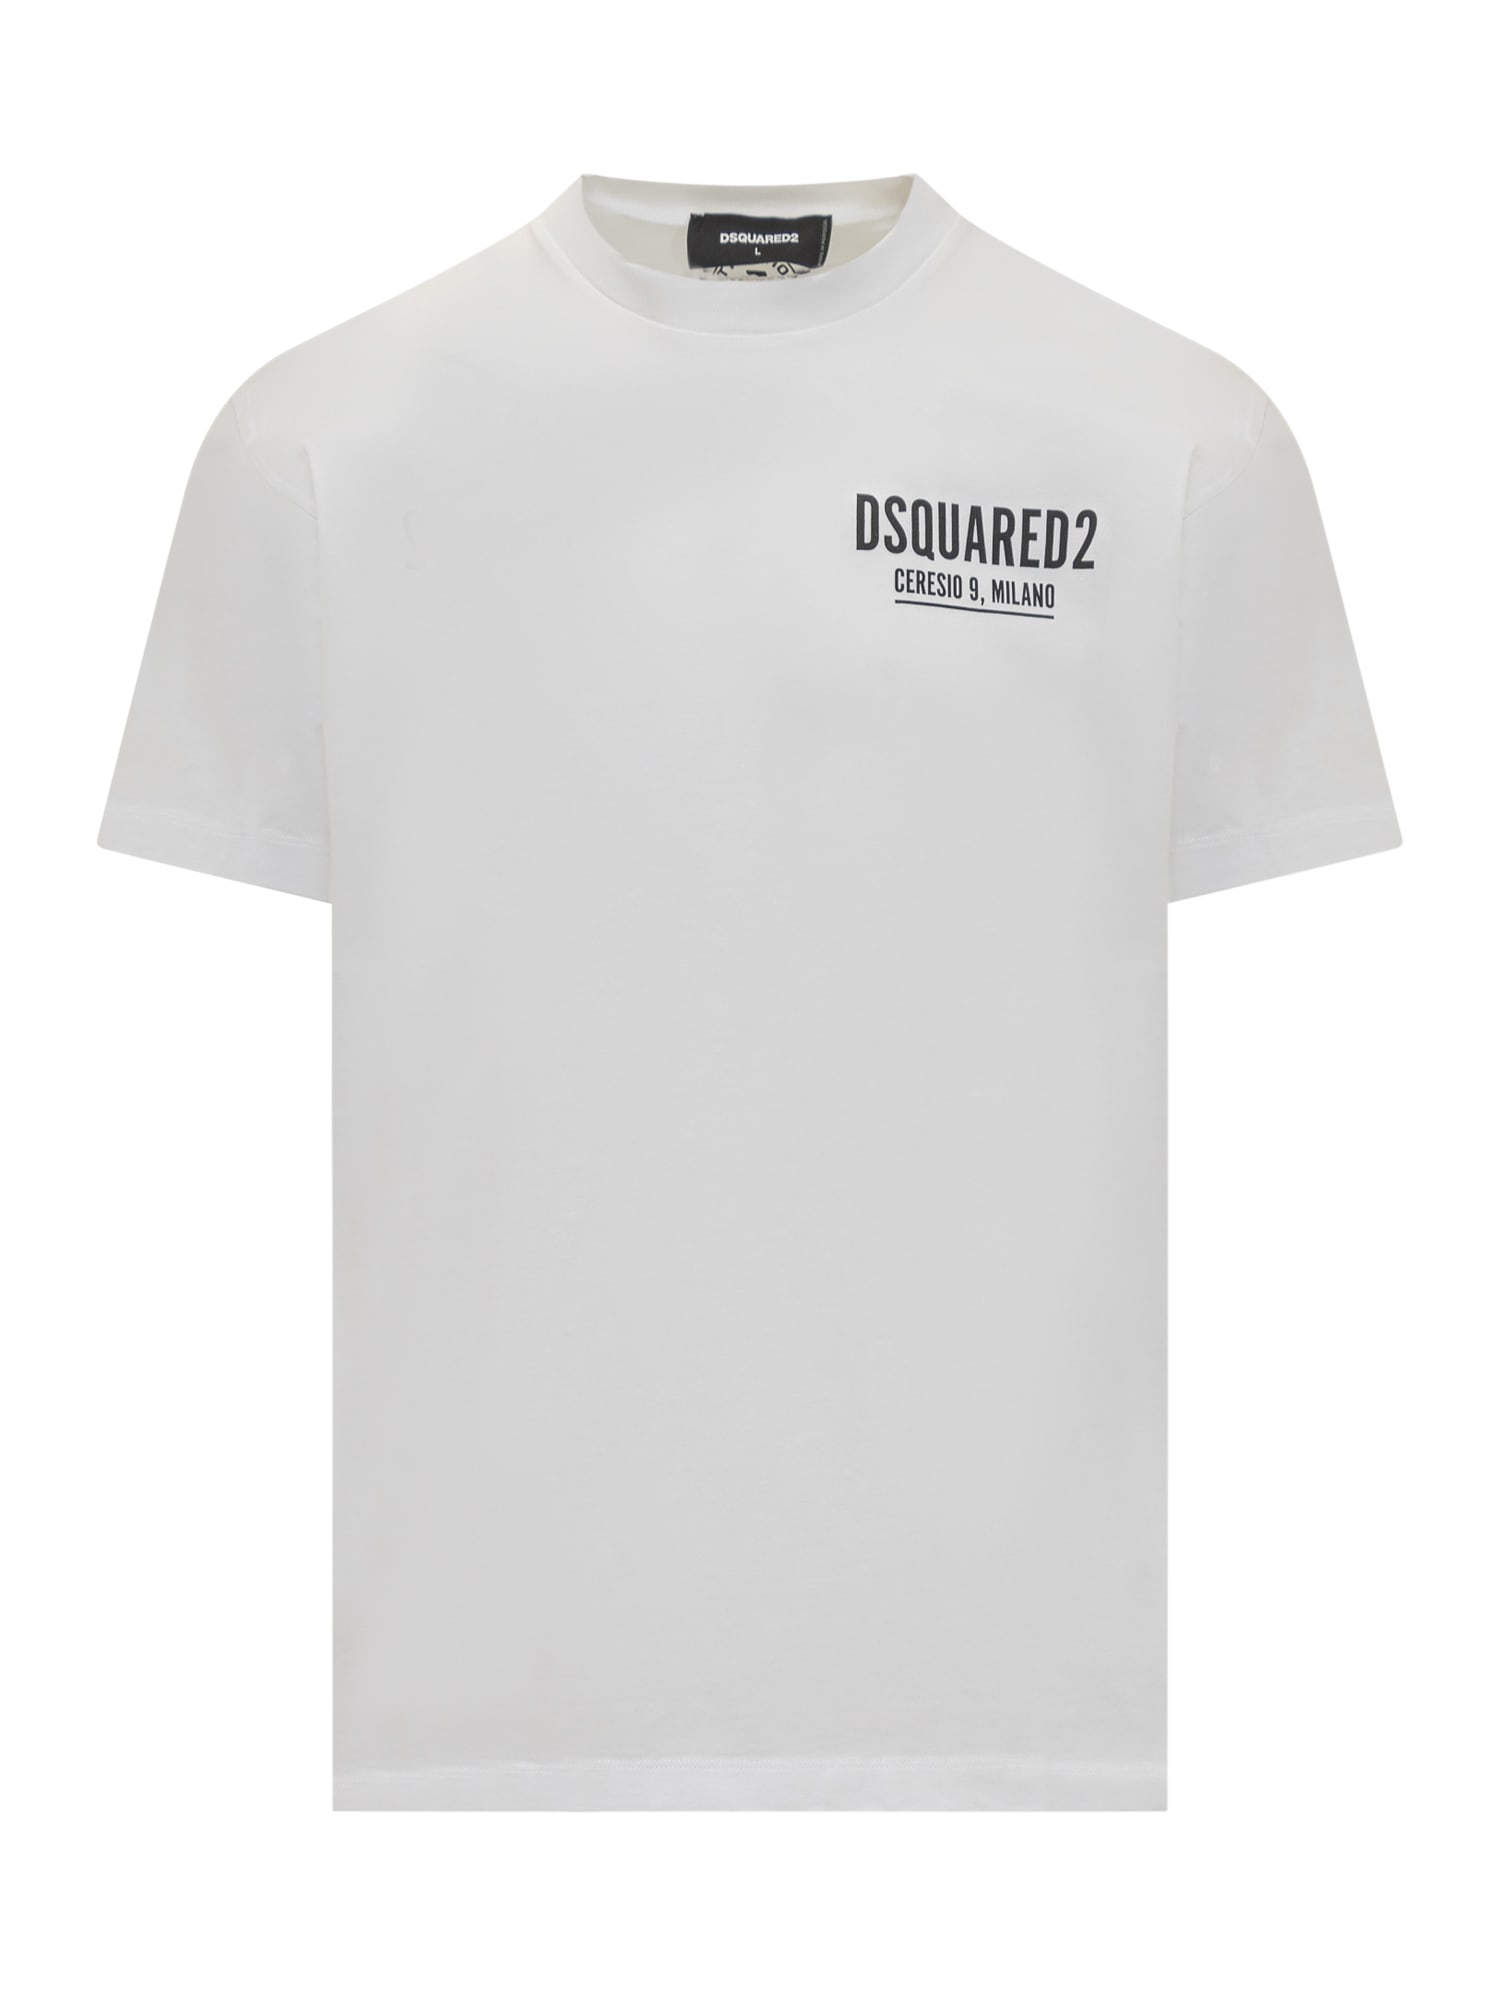 Shop Dsquared2 Ceresio 9 T-shirt In Bianco